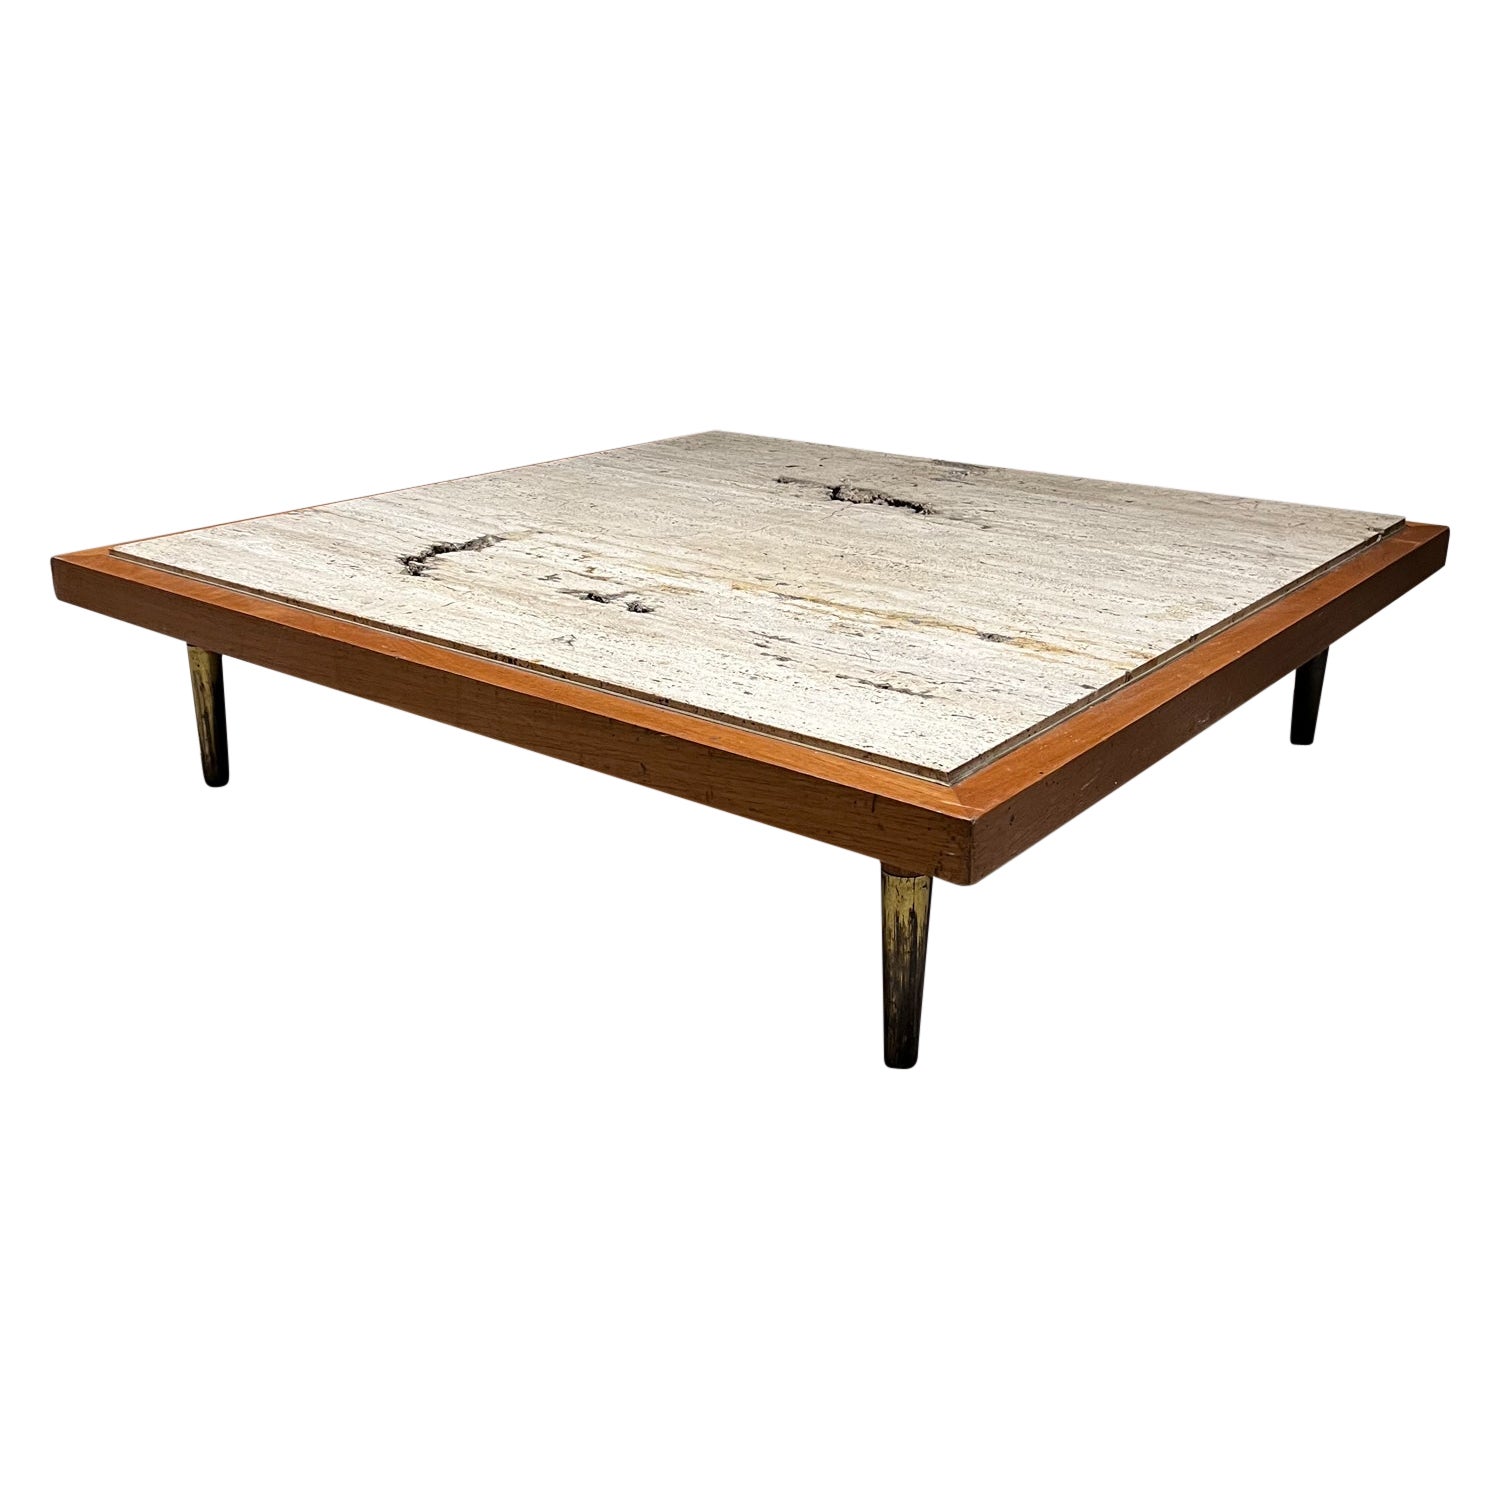 1960s Modern Low Profile Coffee Table Travertine Mahogany Wood & Brass Legs For Sale